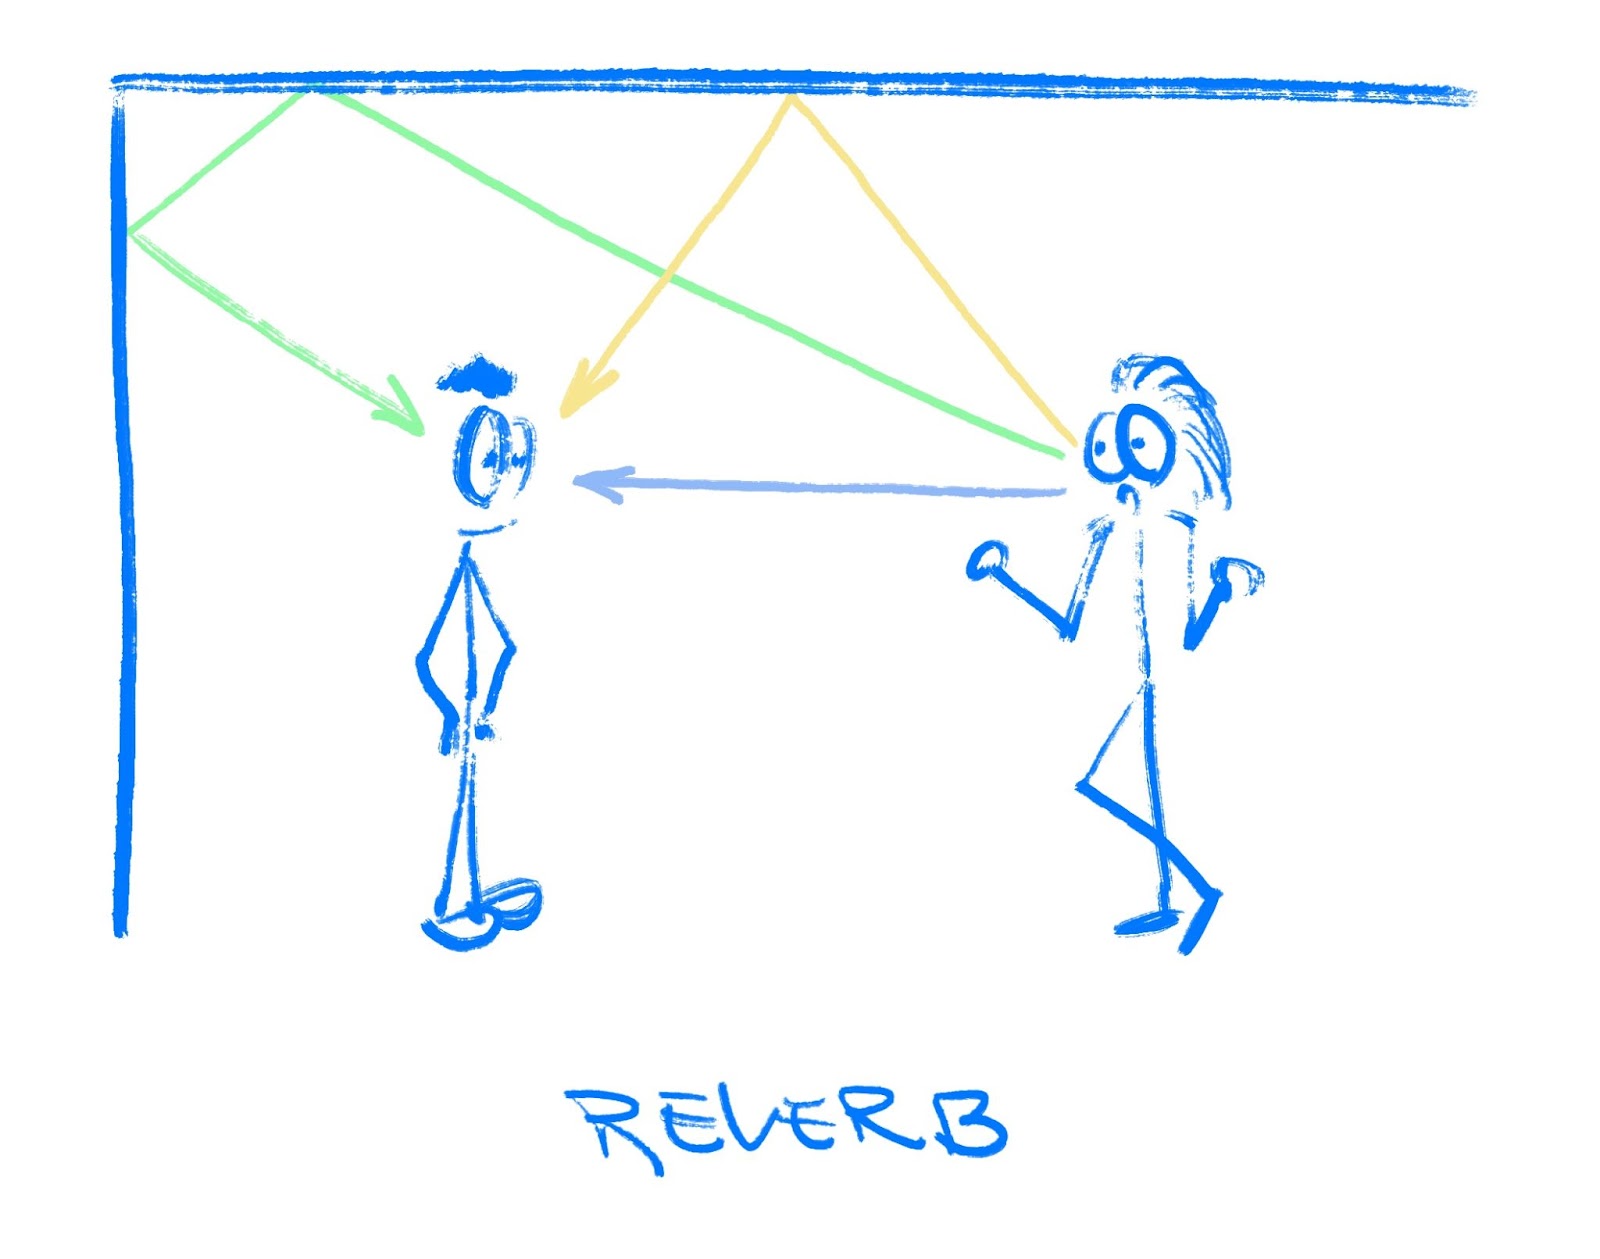 An illustration of two people talking in a room. The sound waves go not only from one person to the other directly, but also bounce off the walls and the ceiling.